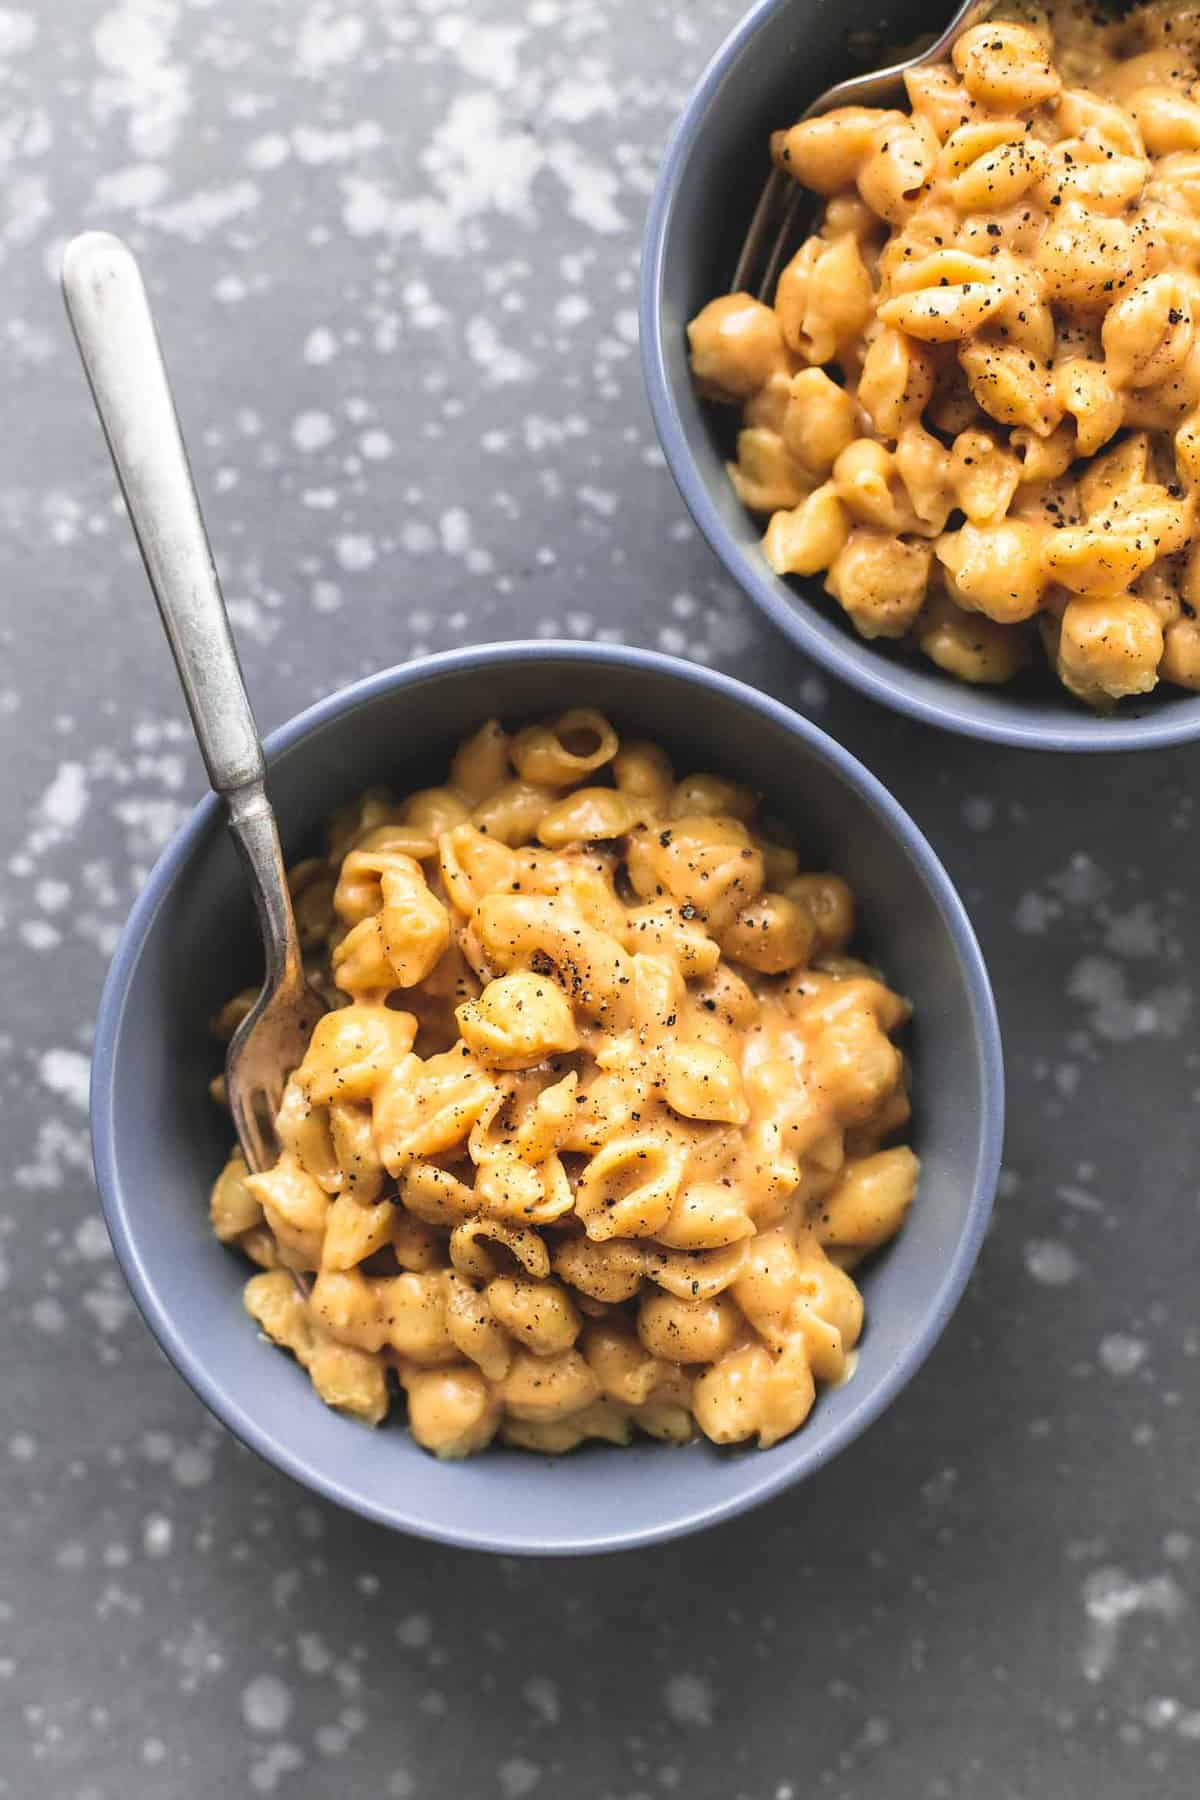 top view of creamy macaroni and cheese with a fork in a bowl with another bowl on the side.